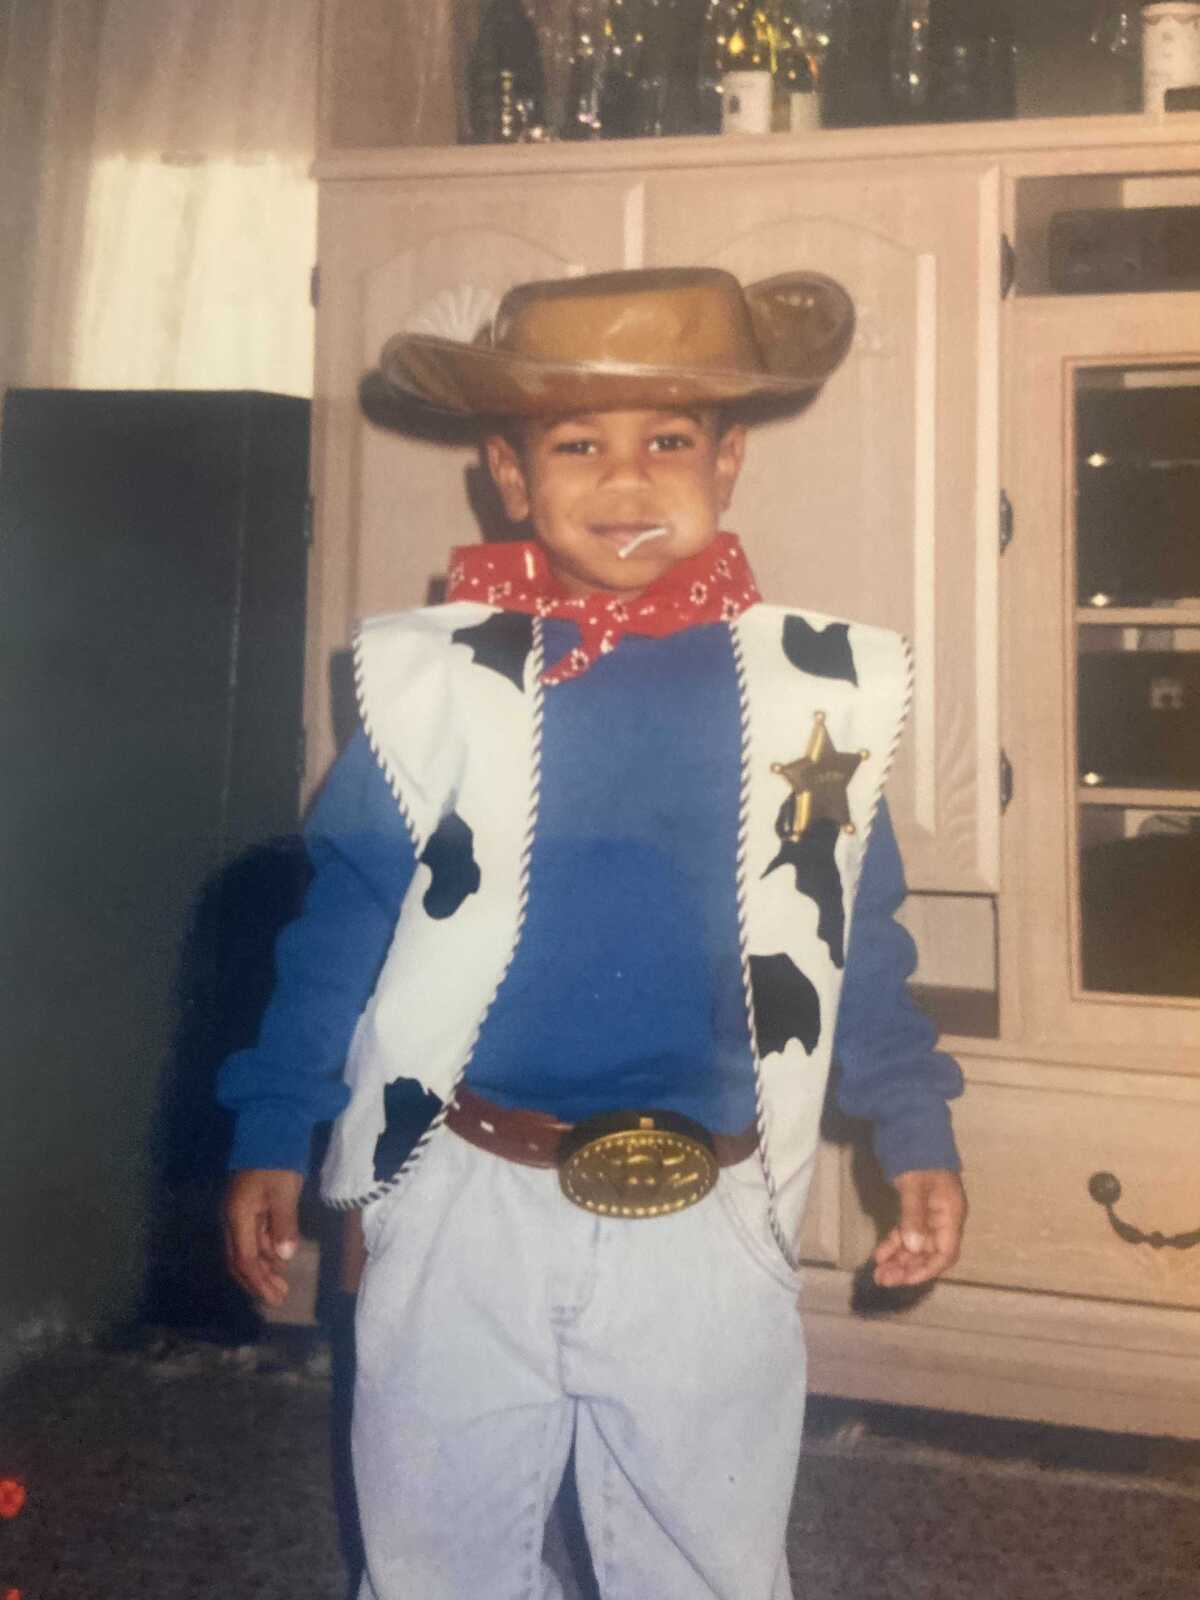 Michael Silva dressed as a sheriff as a child